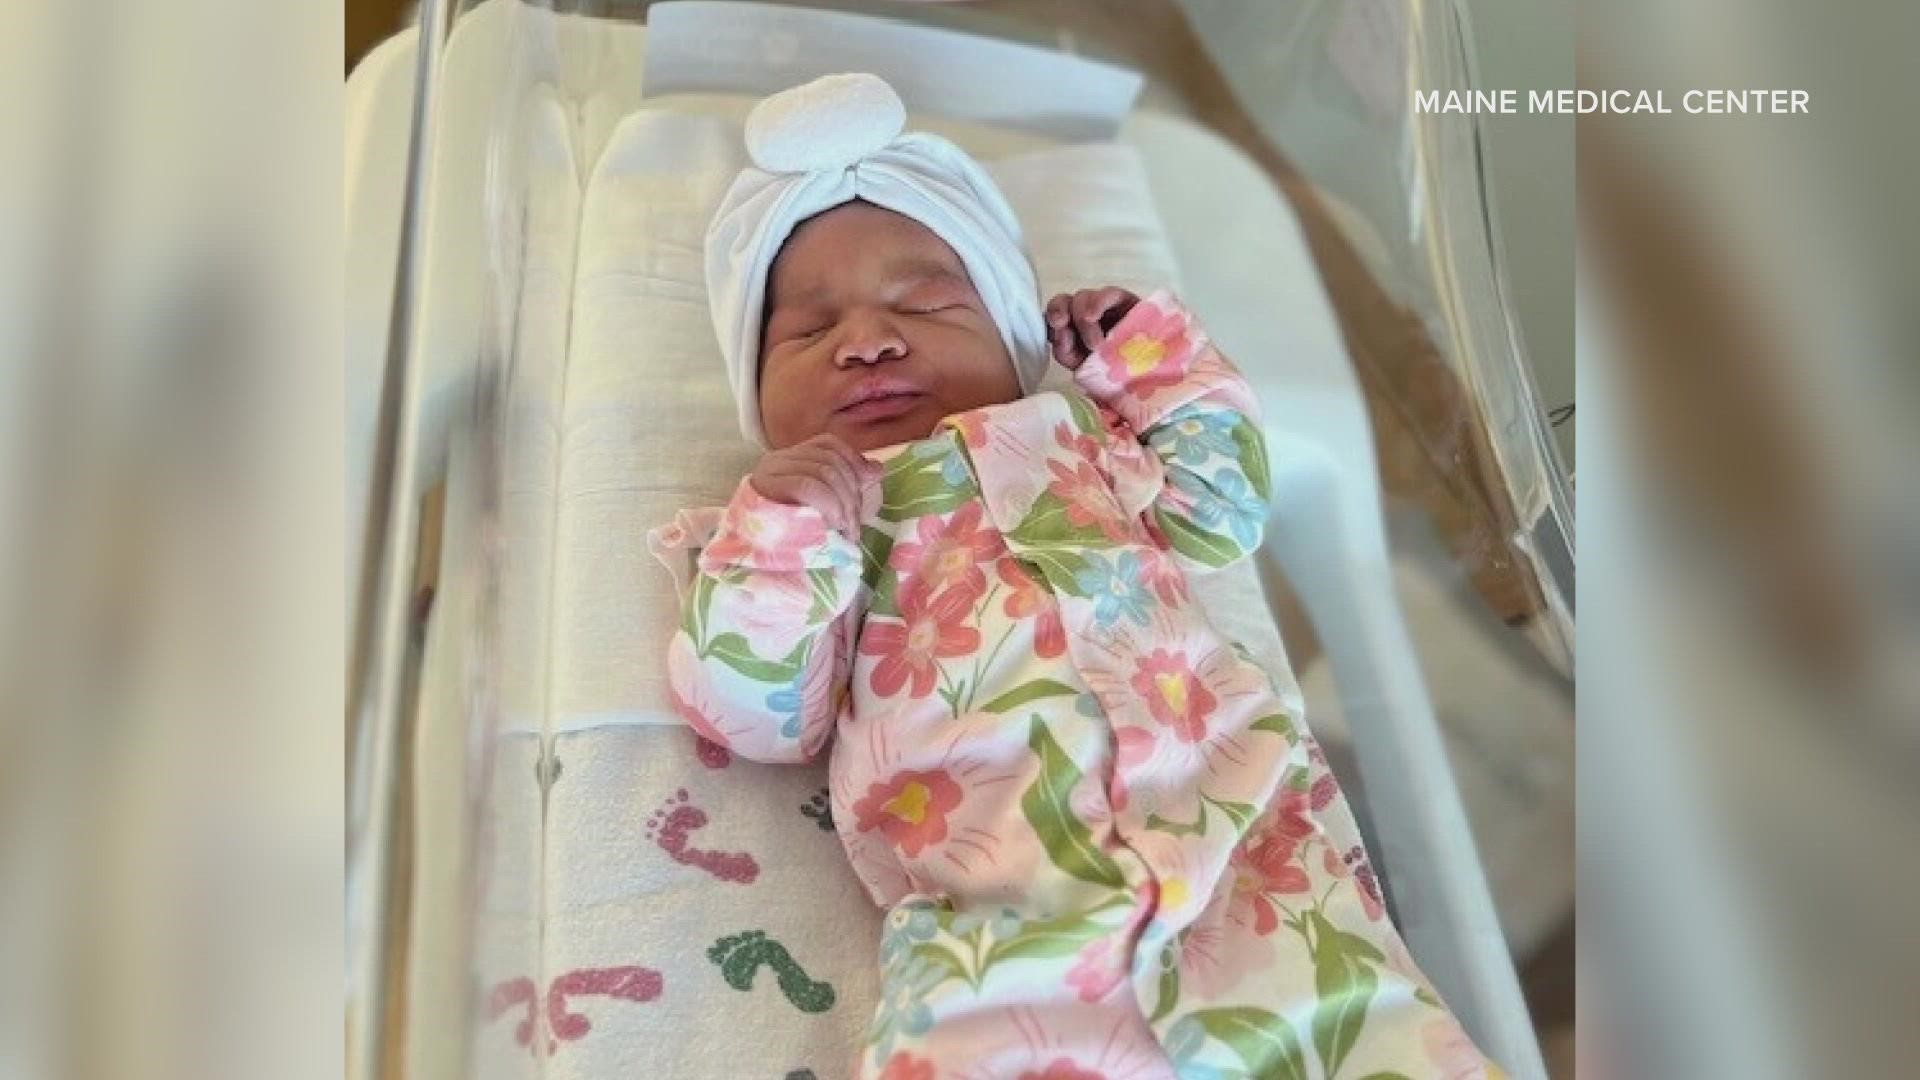 "We are so happy to welcome our daughter," the baby's parents said in a news release. Esther Florandy Saint Aude was born at about 2:30 a.m. Jan. 1, 2023.